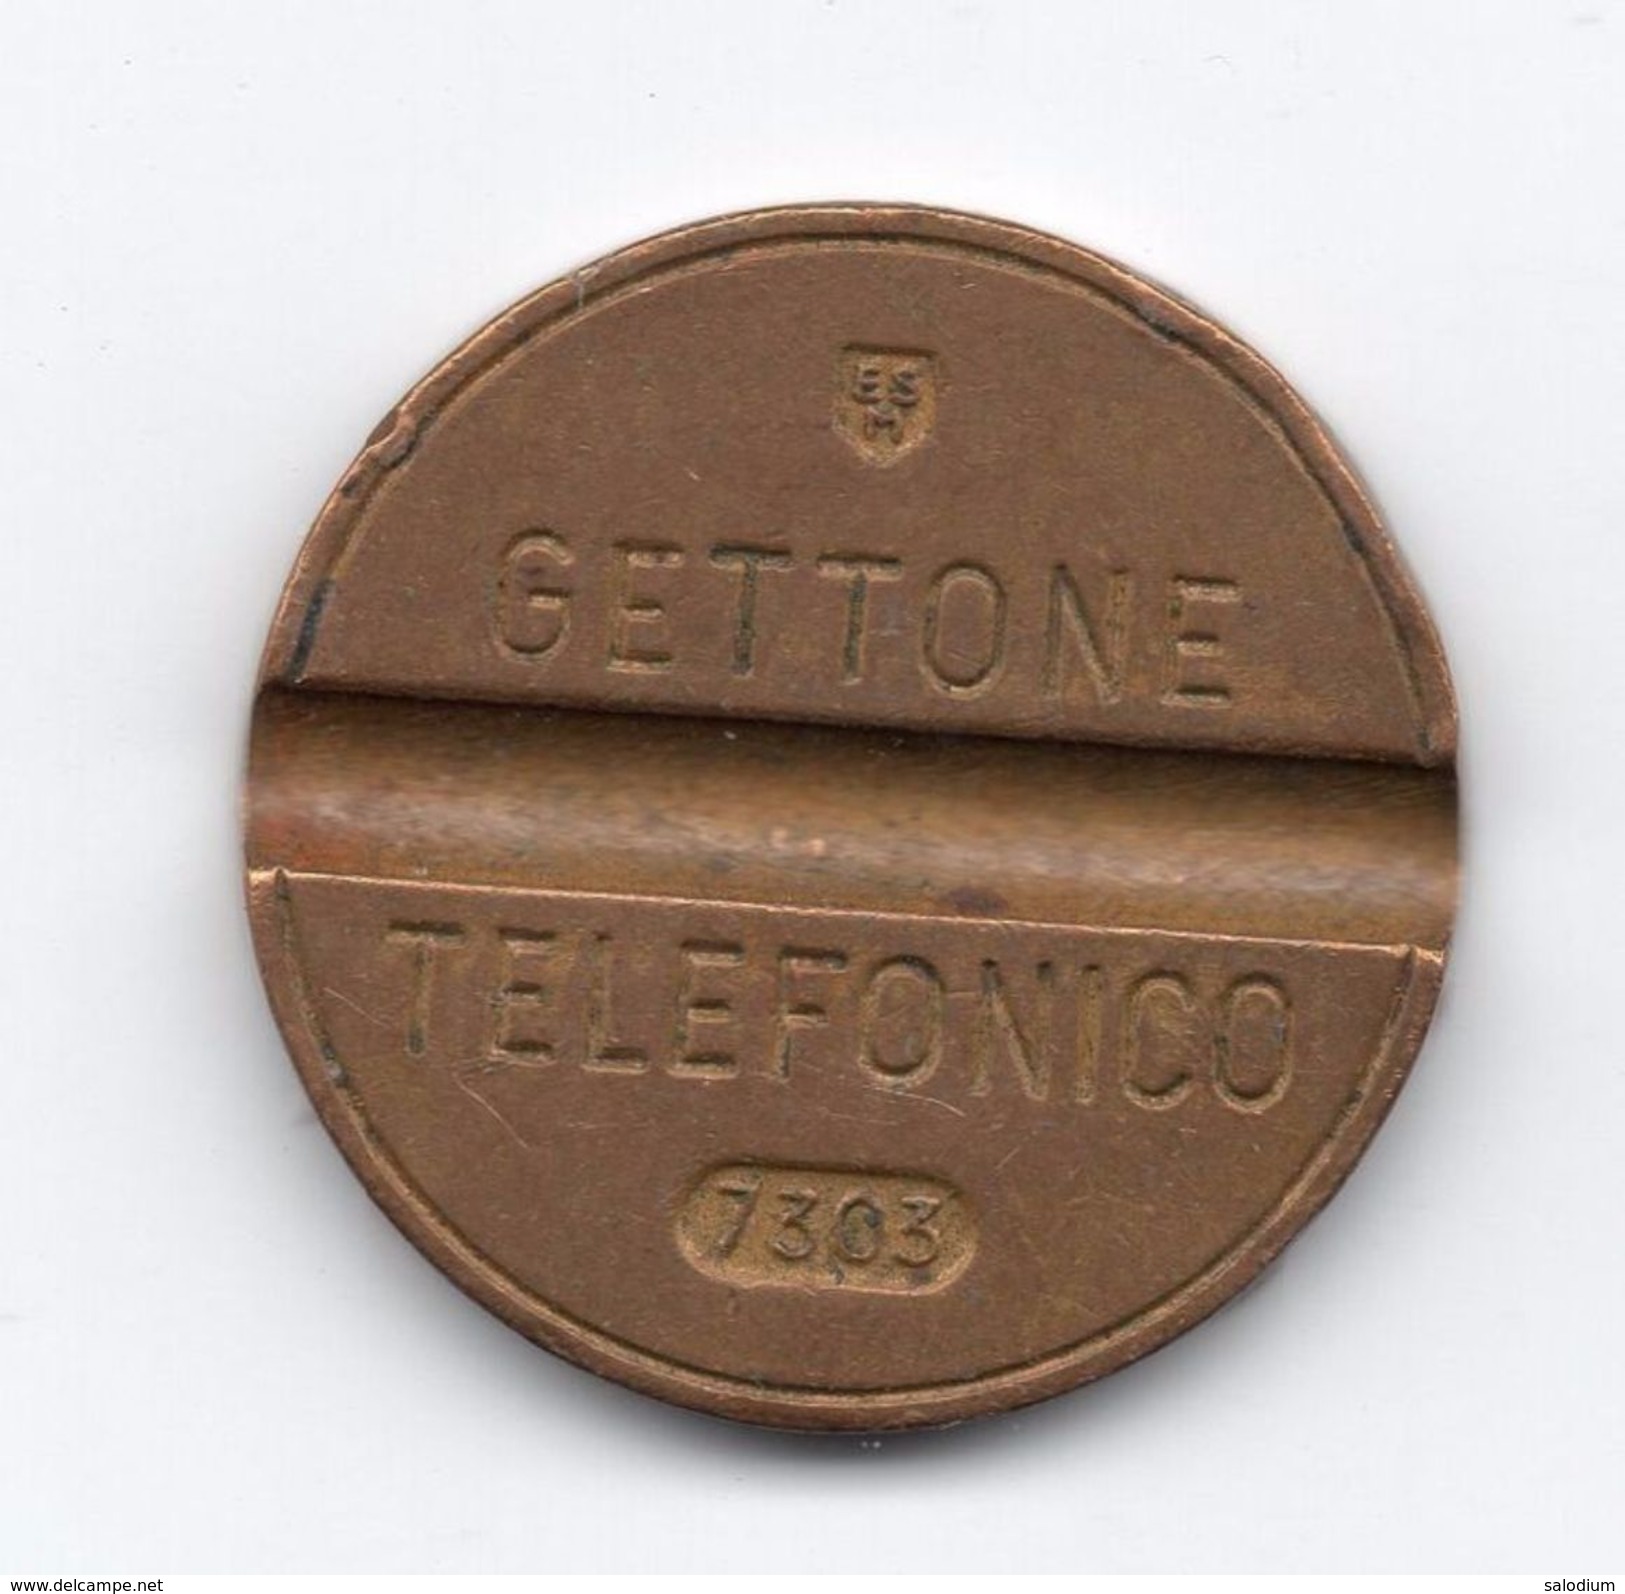 Gettone Telefonico 7303 Token Telephone - (Id-687) - Professionals/Firms